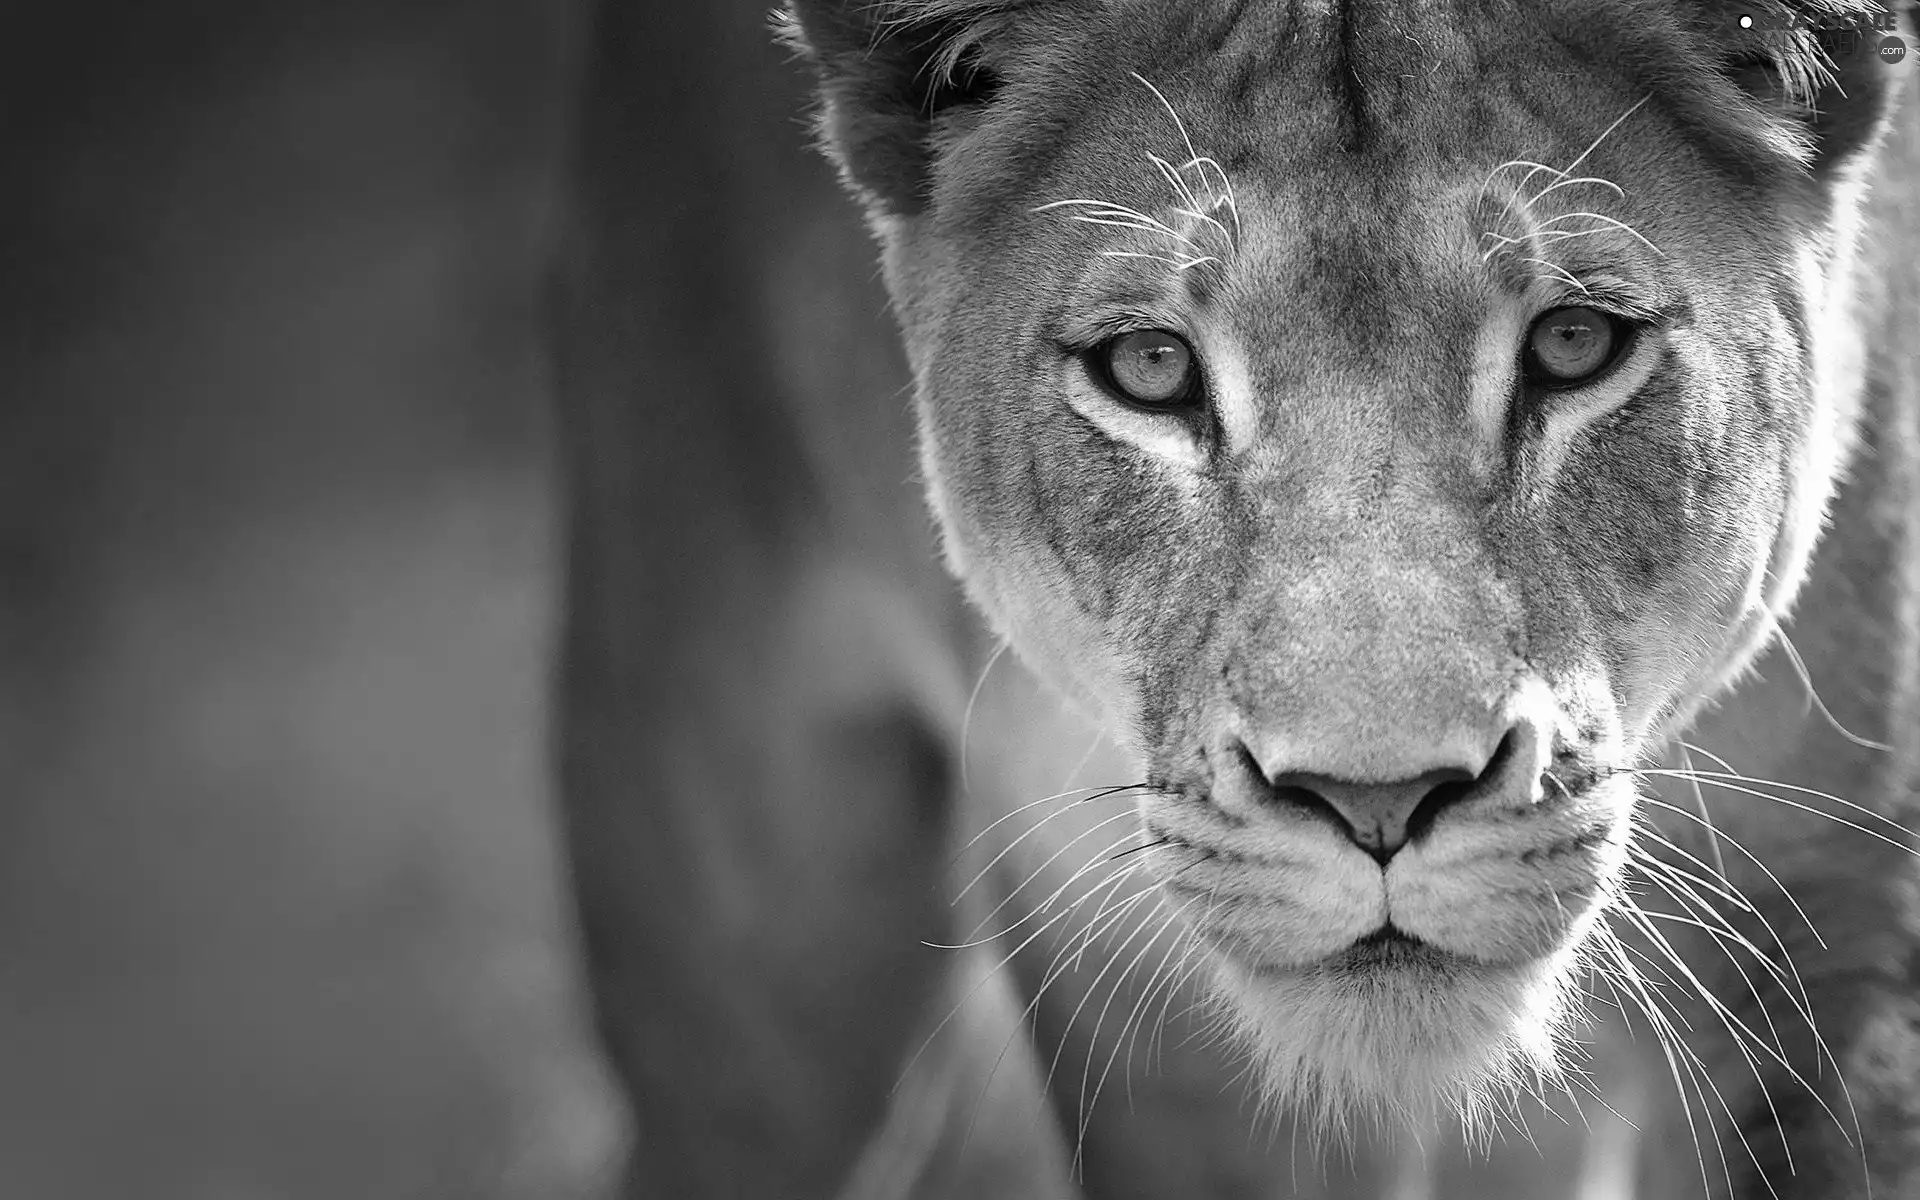 The look, Lioness, Eyes